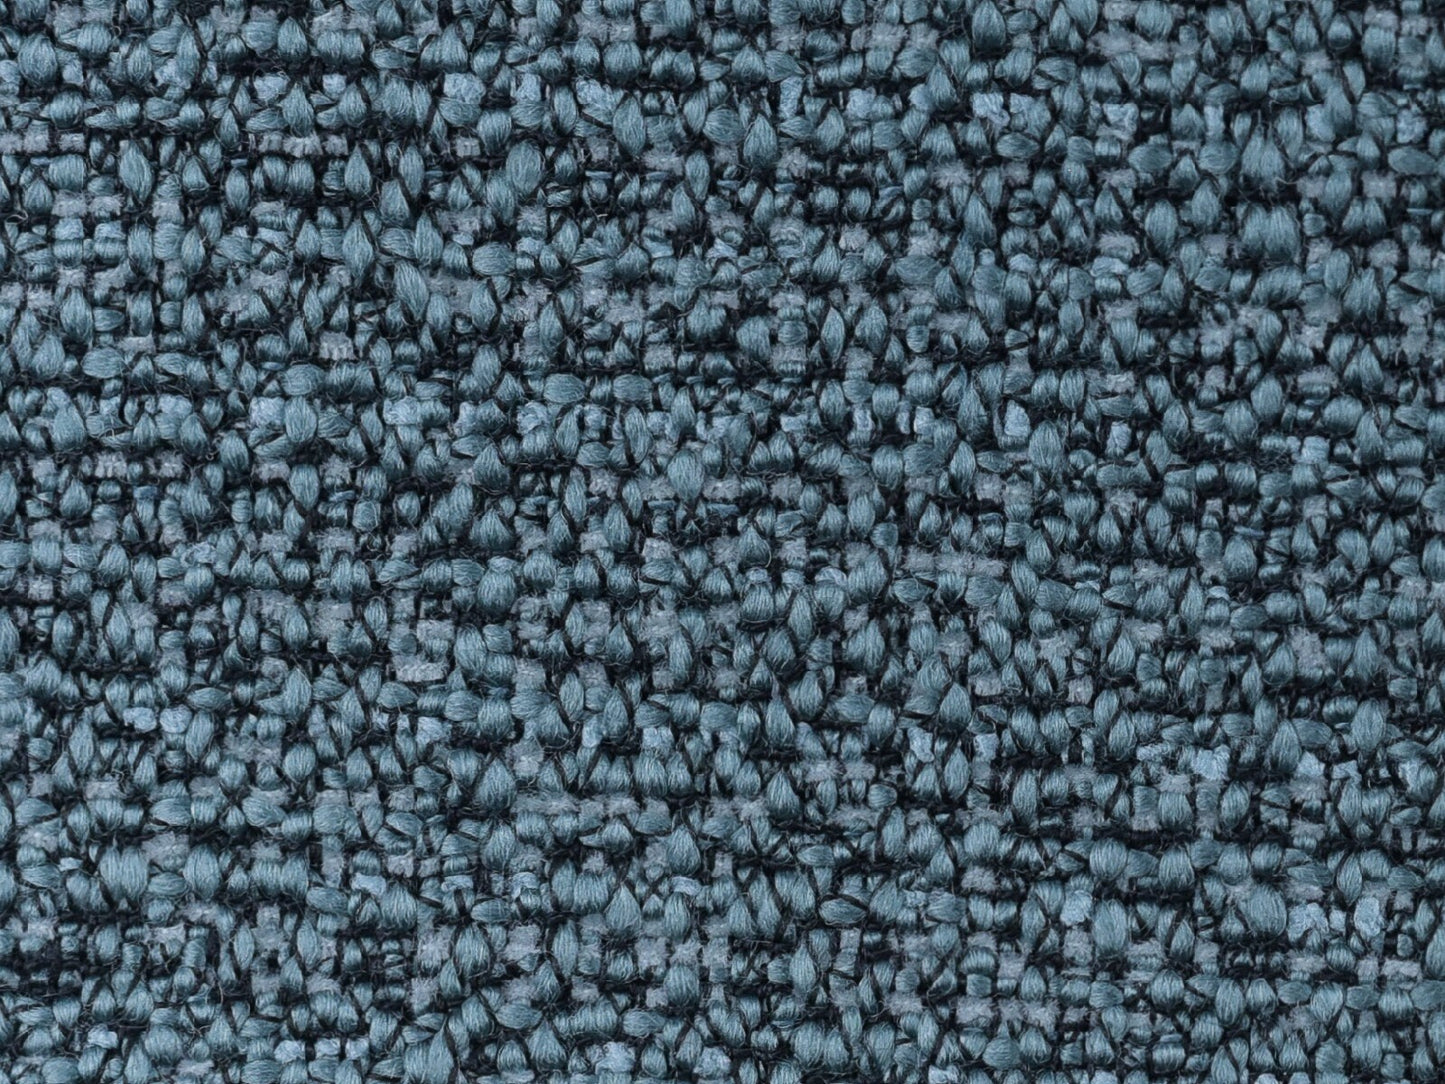 Contemporary Coarse Woven Textured Upholstery Fabric By The Yard 57"W/600GSM-Capability Storm Blue